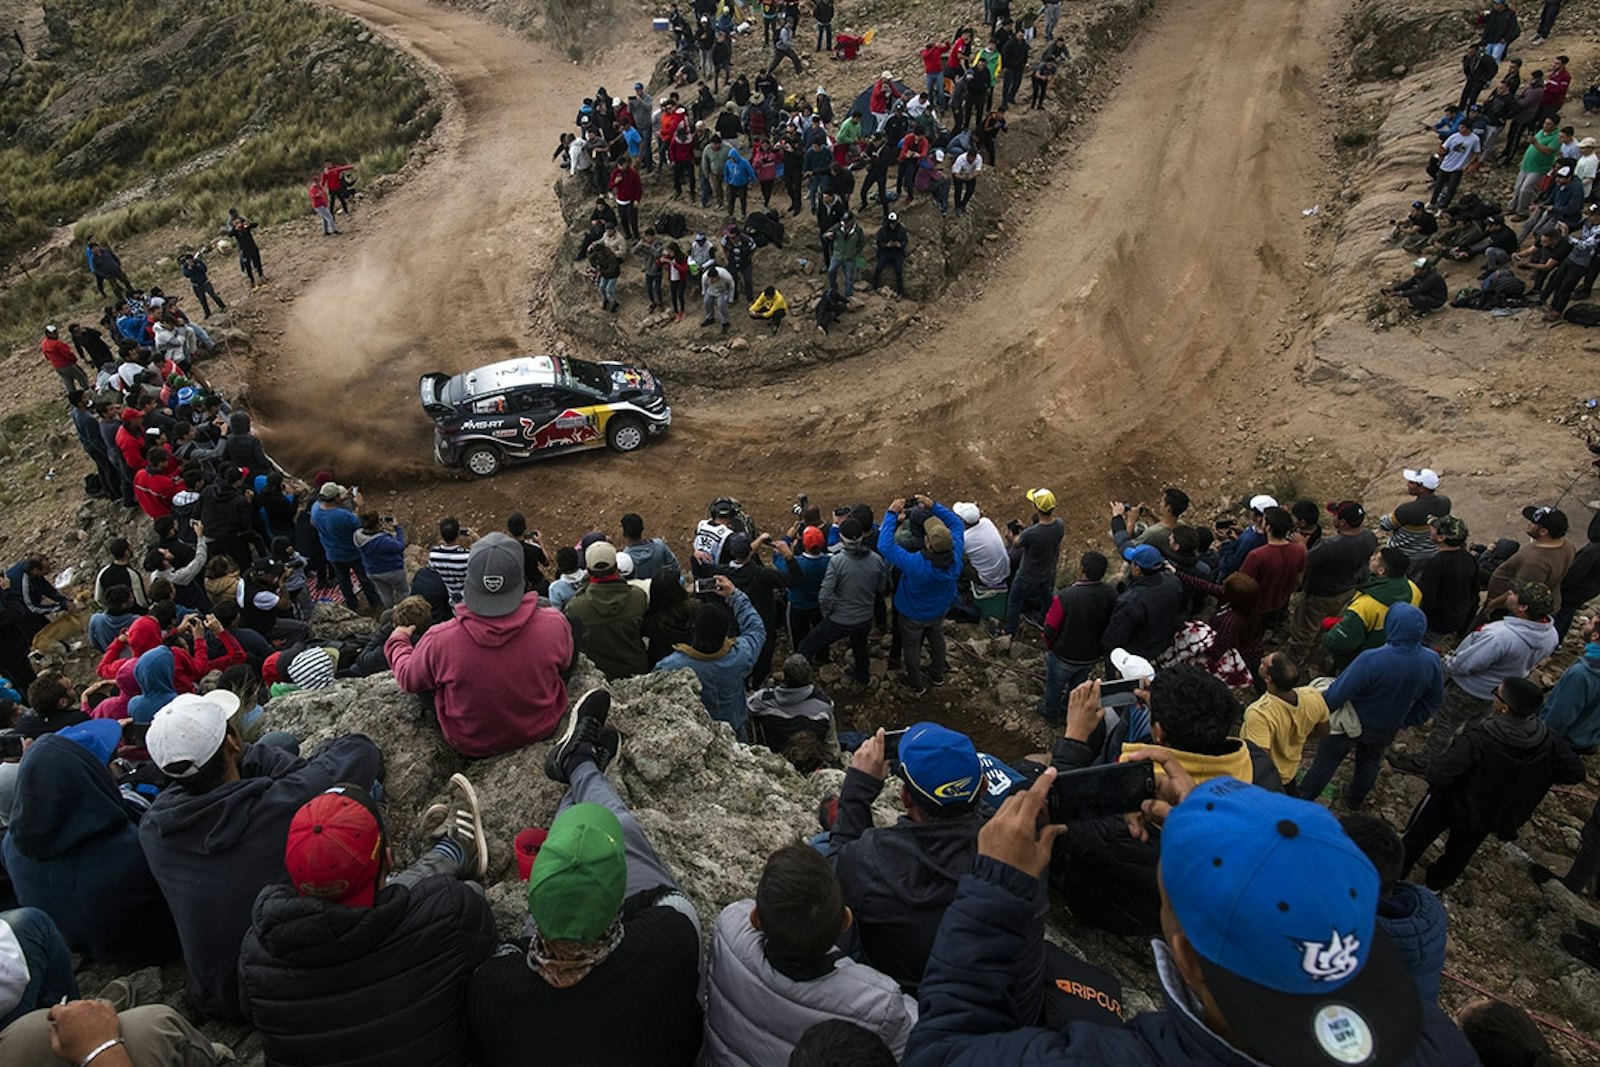 Sebastien Ogier (FRA) performs during FIA World Rally Championship 2018 in Cordoba, Argentina on 29.04.2018 // Jaanus Ree/Red Bull Content Pool // AP-1VGXNMUZ52111 // Usage for editorial use only // Please go to www.redbullcontentpool.com for further information. //